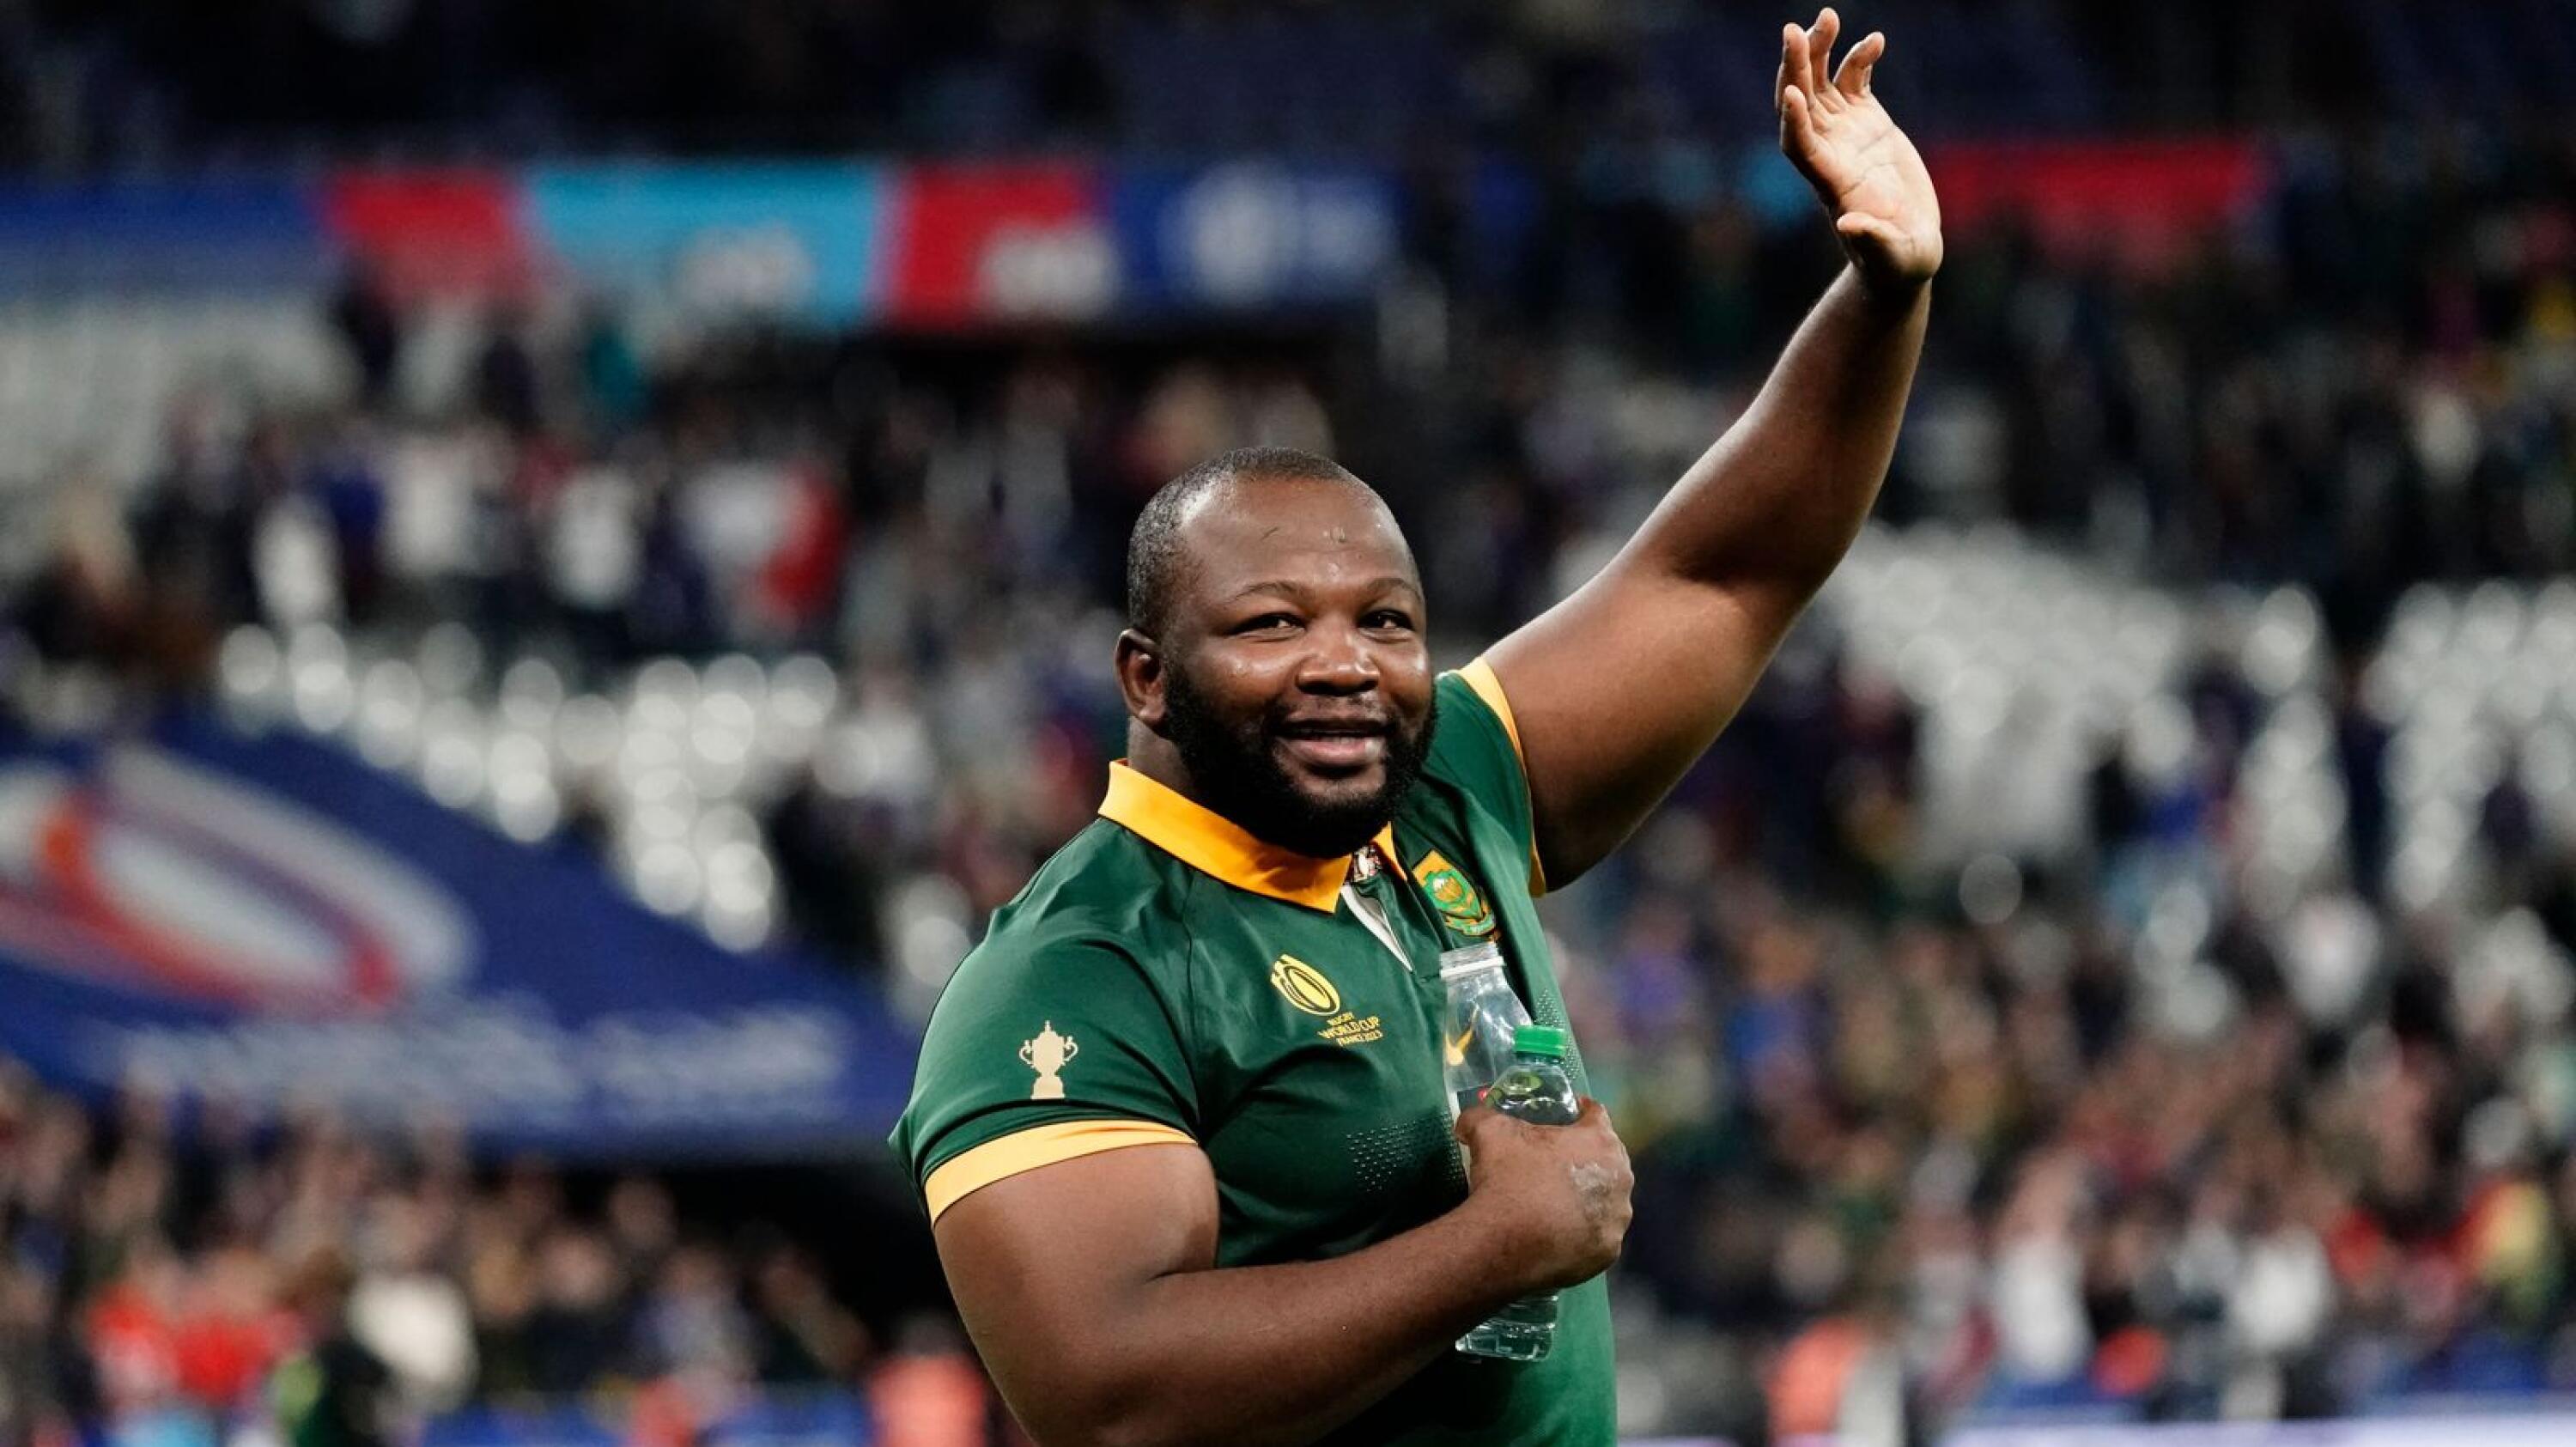 Springboks prop Ox Nche does a lap of honour with his teammates during the Rugby World Cup.